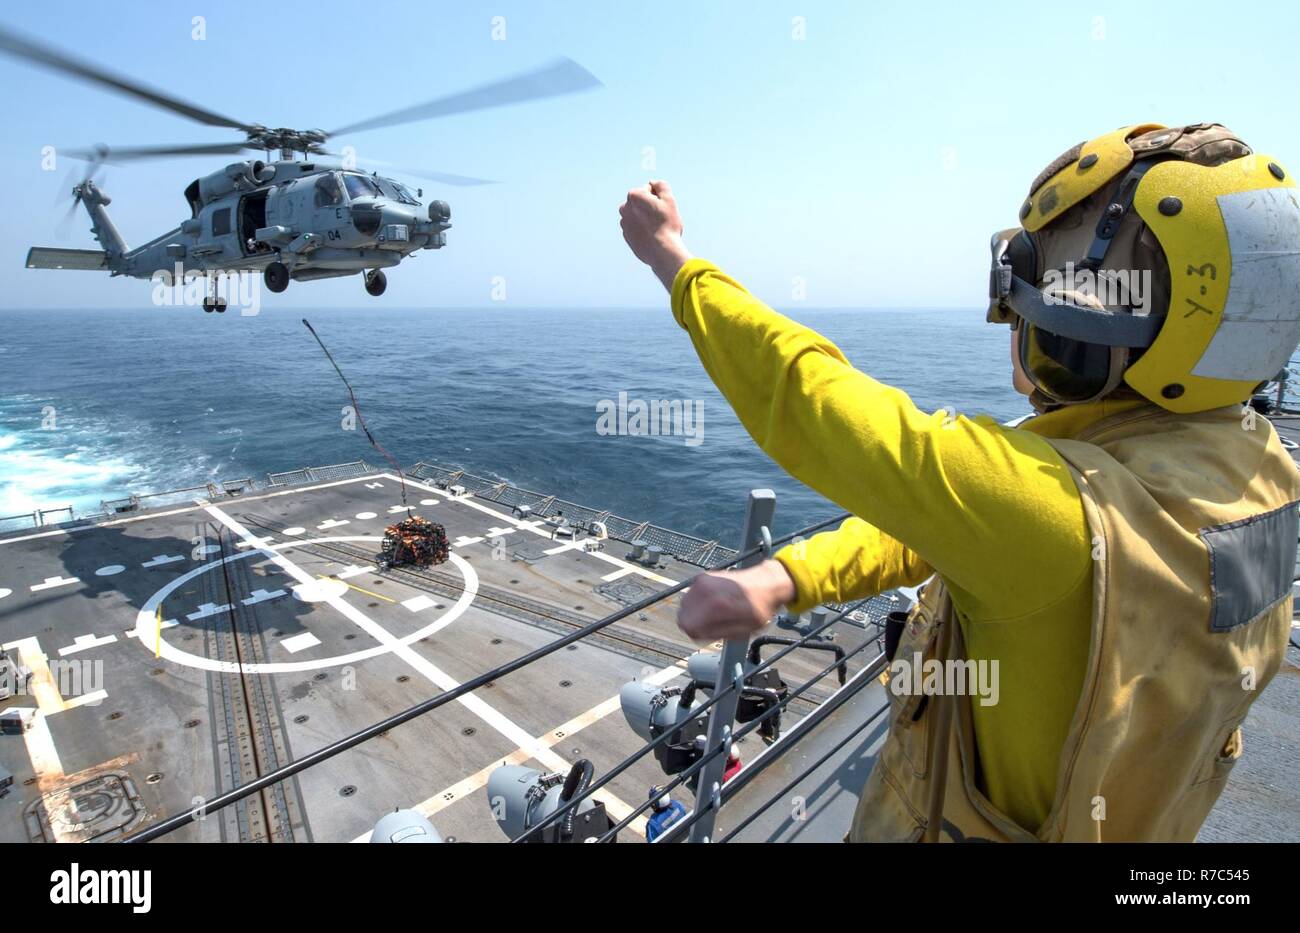 WATERS SOUTH OF JAPAN (May 12, 2017) Electronics Technician 3rd Class Jonathan Hill guides an MH-60R Sea Hawk helicopter assigned to the “Warlords” of Helicopter Maritime Strike Squadron (HSM) 51 during a vertical replenishment training exercise aboard the Arleigh Burke-class guided-missile destroyer USS McCampbell (DDG 85). The ship is on patrol in the U.S. 7th Fleet area of operations in support of security and stability in the Indo-Asia-Pacific region. Stock Photo